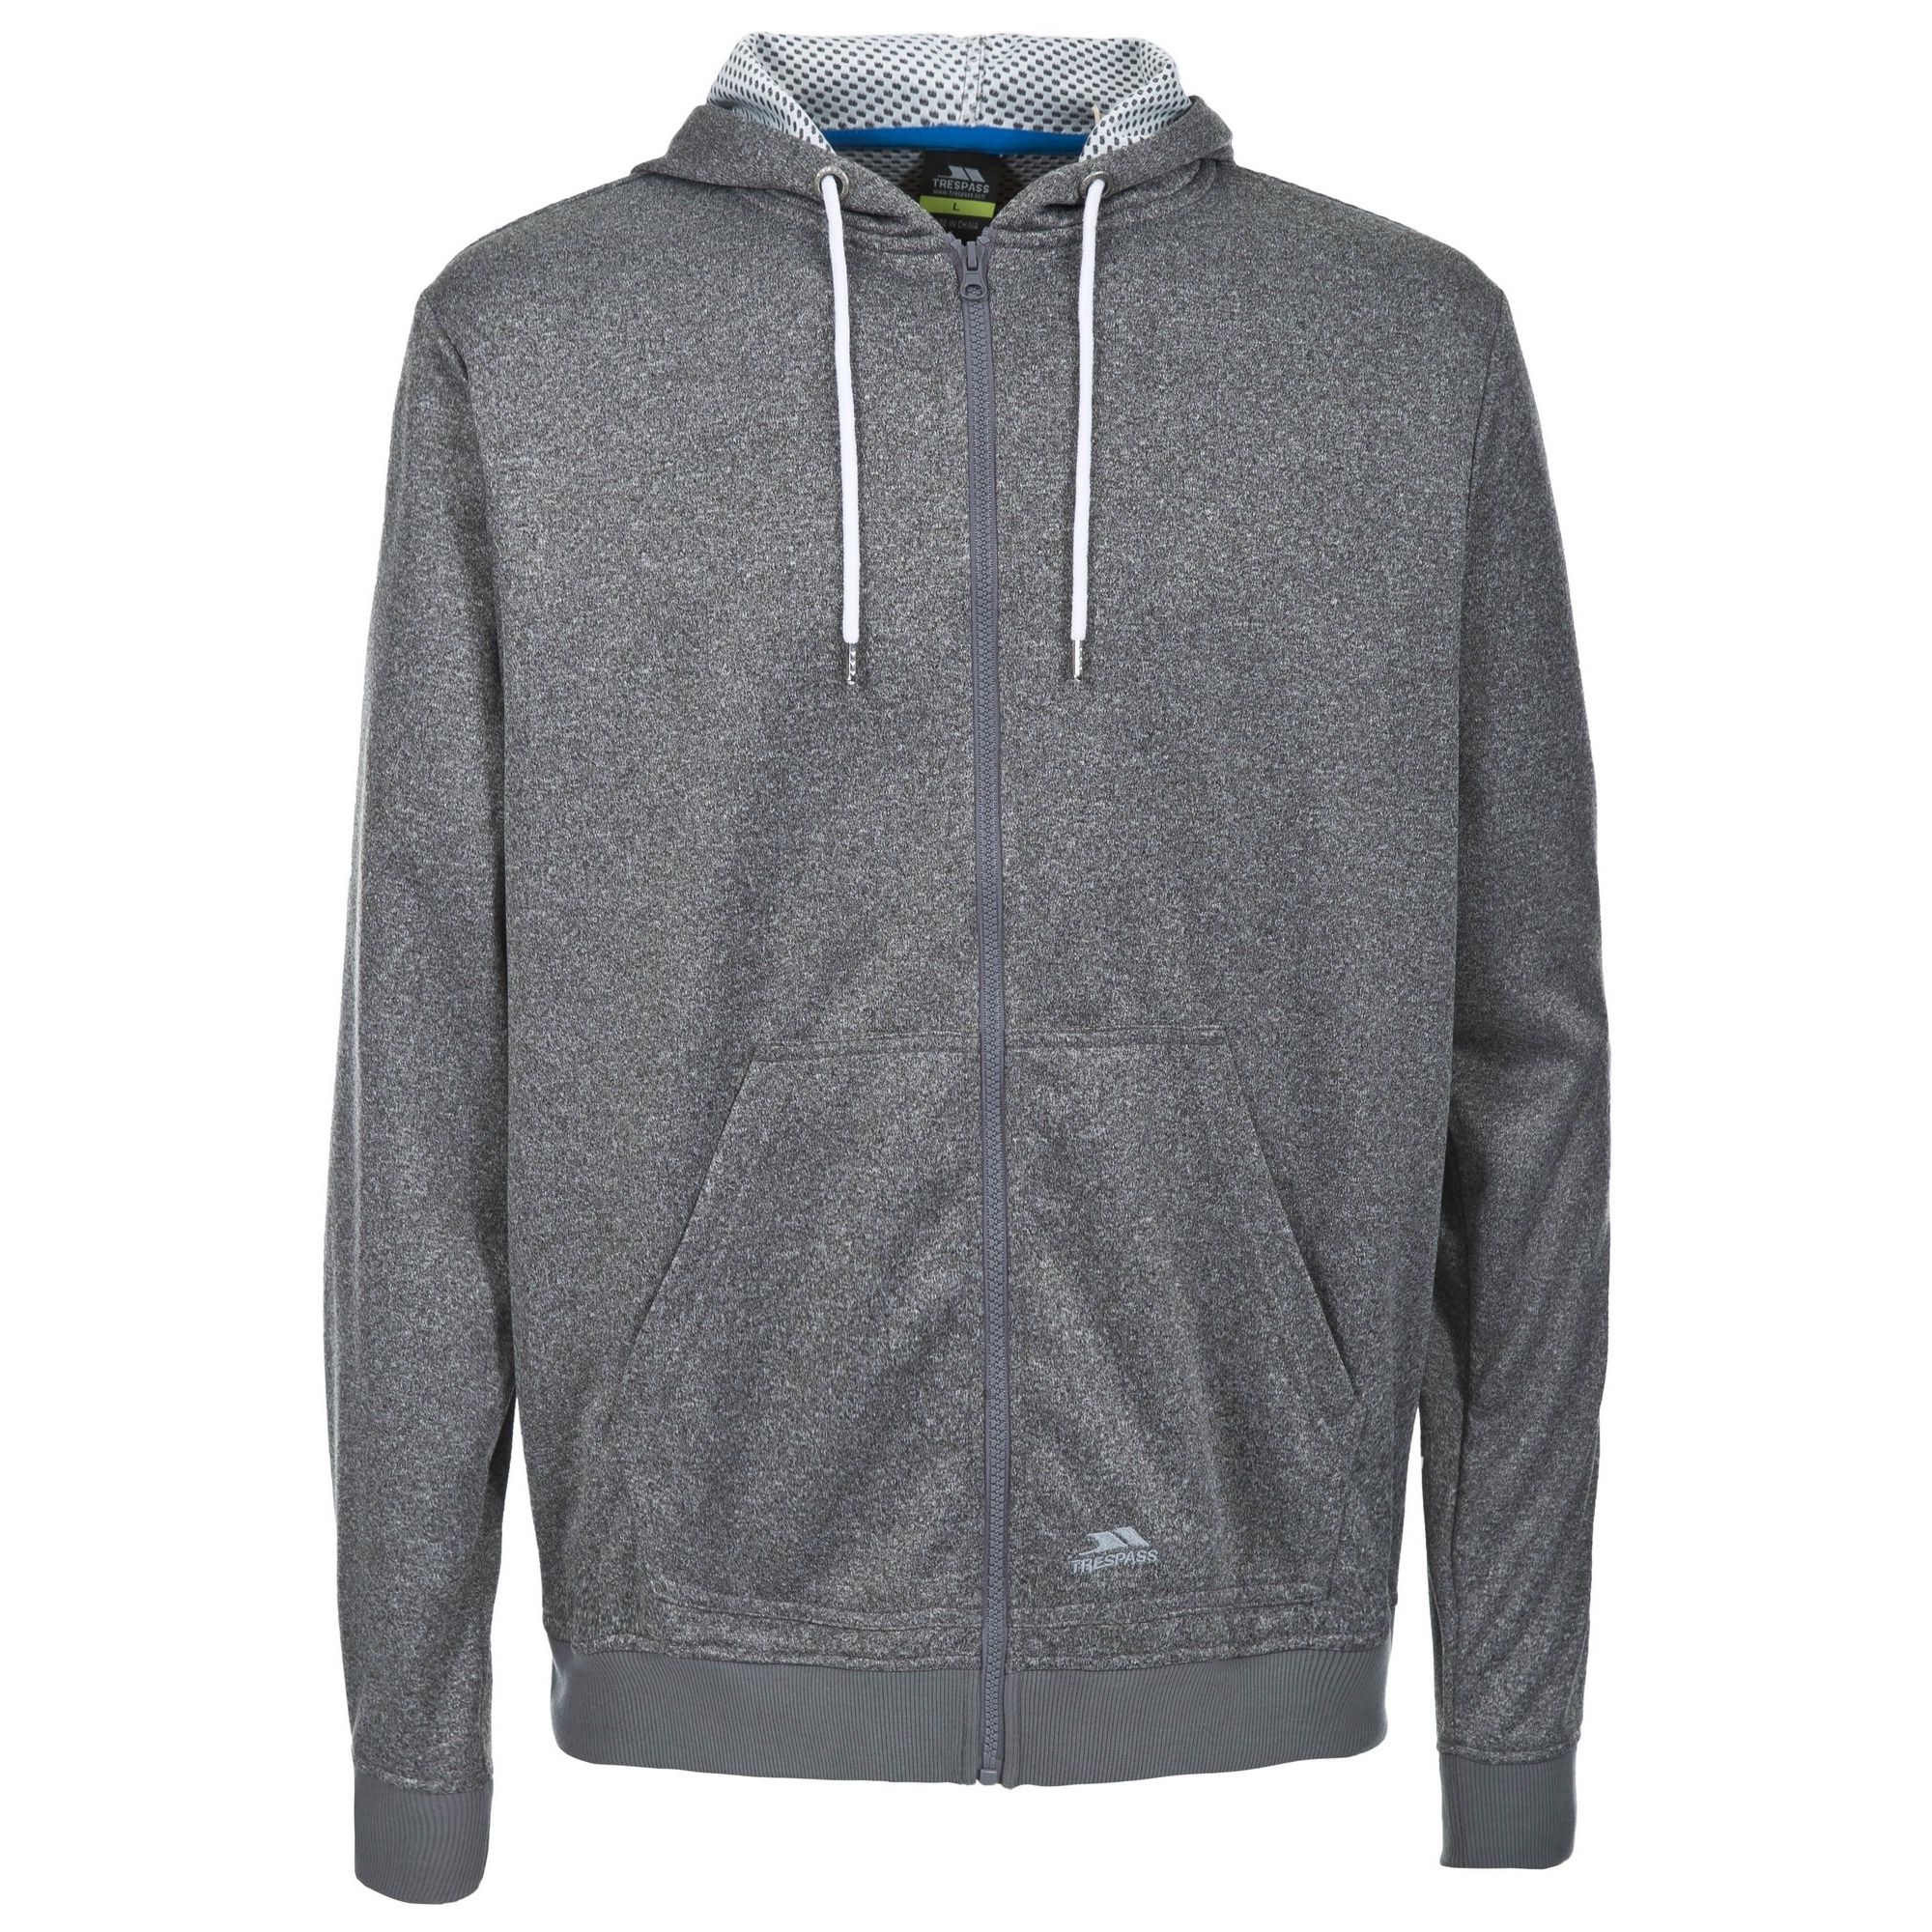 Jacquard fleece. Full zip. Adjustable grown on hood. Front pouch pockets. Ribbed cuffs and hem. Airtrap. 100% Polyester. Trespass Mens Chest Sizing (approx): S - 35-37in/89-94cm, M - 38-40in/96.5-101.5cm, L - 41-43in/104-109cm, XL - 44-46in/111.5-117cm, XXL - 46-48in/117-122cm, 3XL - 48-50in/122-127cm.